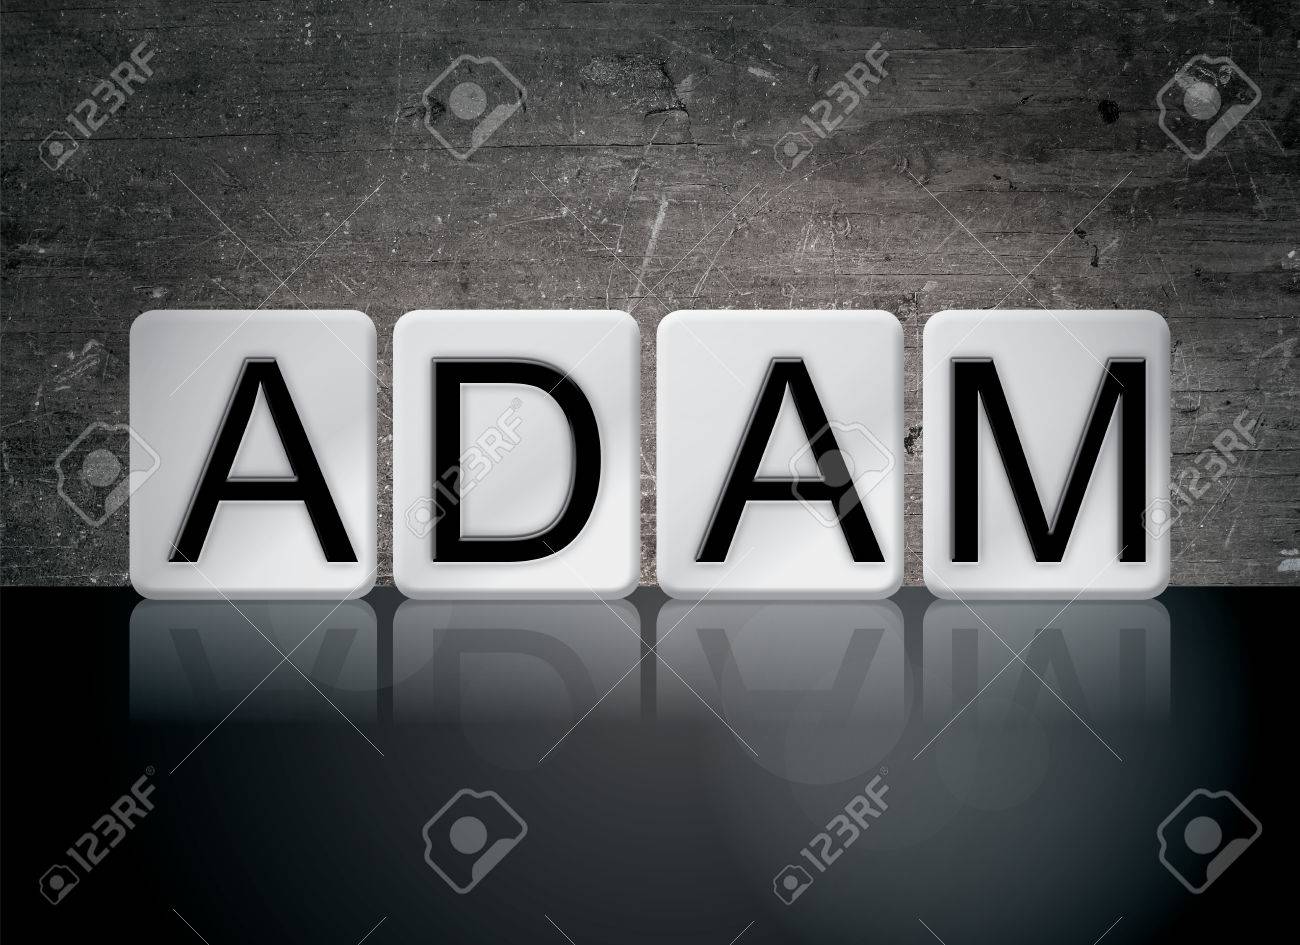 The Name Adam Concept And Theme Written In White Tiles On A Dark